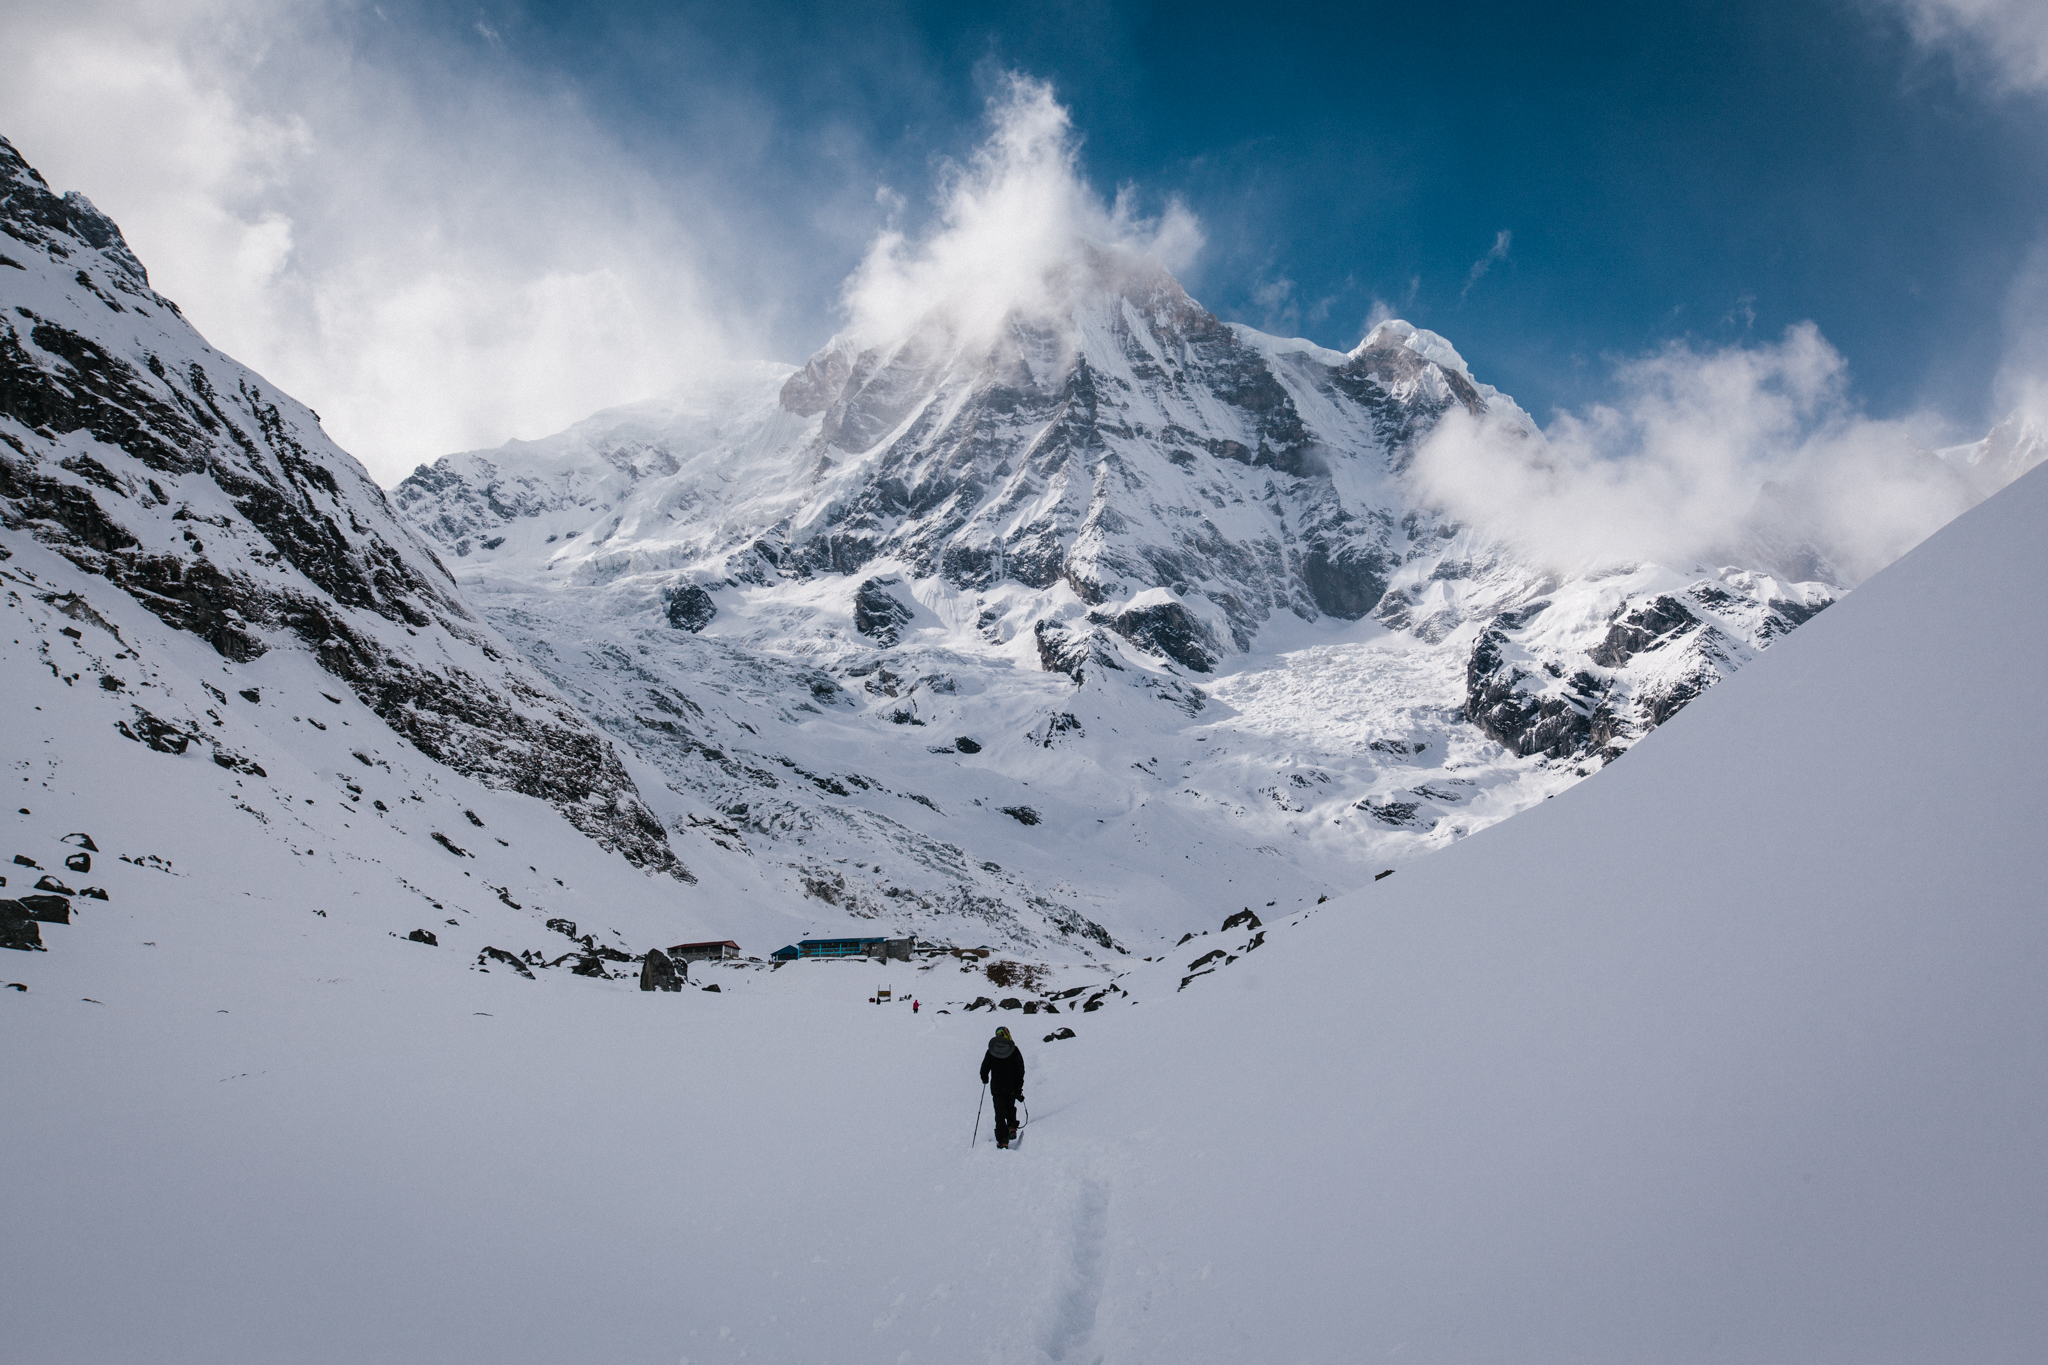 Buying These Epic Photos Will Help Nepal